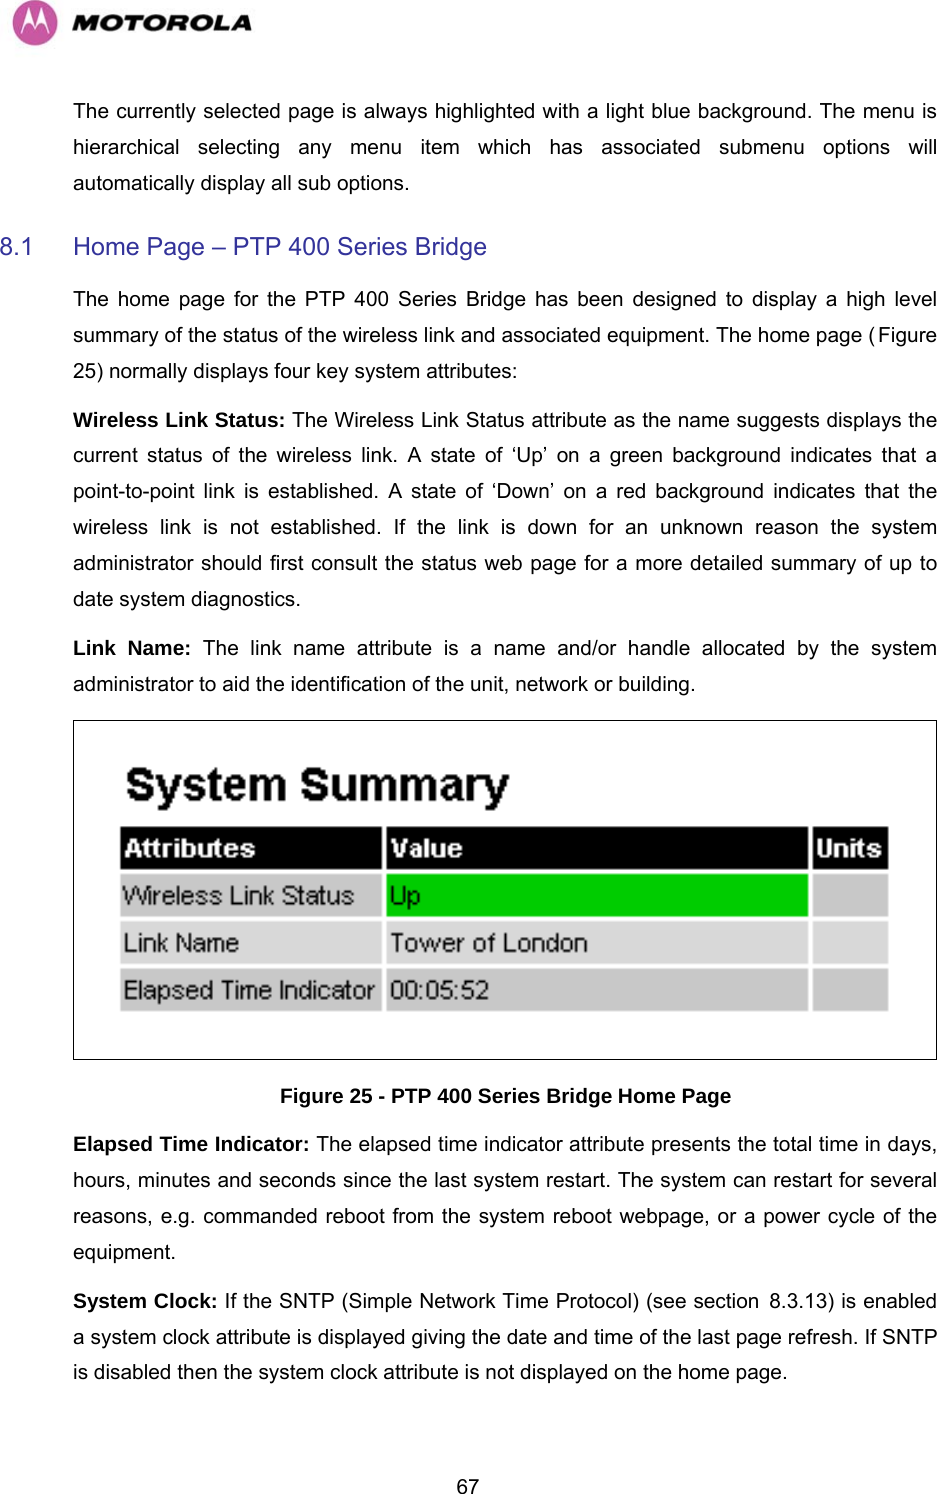   67The currently selected page is always highlighted with a light blue background. The menu is hierarchical selecting any menu item which has associated submenu options will automatically display all sub options. 8.1  Home Page – PTP 400 Series Bridge The home page for the PTP 400 Series Bridge has been designed to display a high level summary of the status of the wireless link and associated equipment. The home page (HFigure 25) normally displays four key system attributes: Wireless Link Status: The Wireless Link Status attribute as the name suggests displays the current status of the wireless link. A state of ‘Up’ on a green background indicates that a point-to-point link is established. A state of ‘Down’ on a red background indicates that the wireless link is not established. If the link is down for an unknown reason the system administrator should first consult the status web page for a more detailed summary of up to date system diagnostics.  Link Name: The link name attribute is a name and/or handle allocated by the system administrator to aid the identification of the unit, network or building.   Figure 25 - PTP 400 Series Bridge Home Page Elapsed Time Indicator: The elapsed time indicator attribute presents the total time in days, hours, minutes and seconds since the last system restart. The system can restart for several reasons, e.g. commanded reboot from the system reboot webpage, or a power cycle of the equipment.  System Clock: If the SNTP (Simple Network Time Protocol) (see section H8.3.13) is enabled a system clock attribute is displayed giving the date and time of the last page refresh. If SNTP is disabled then the system clock attribute is not displayed on the home page. 